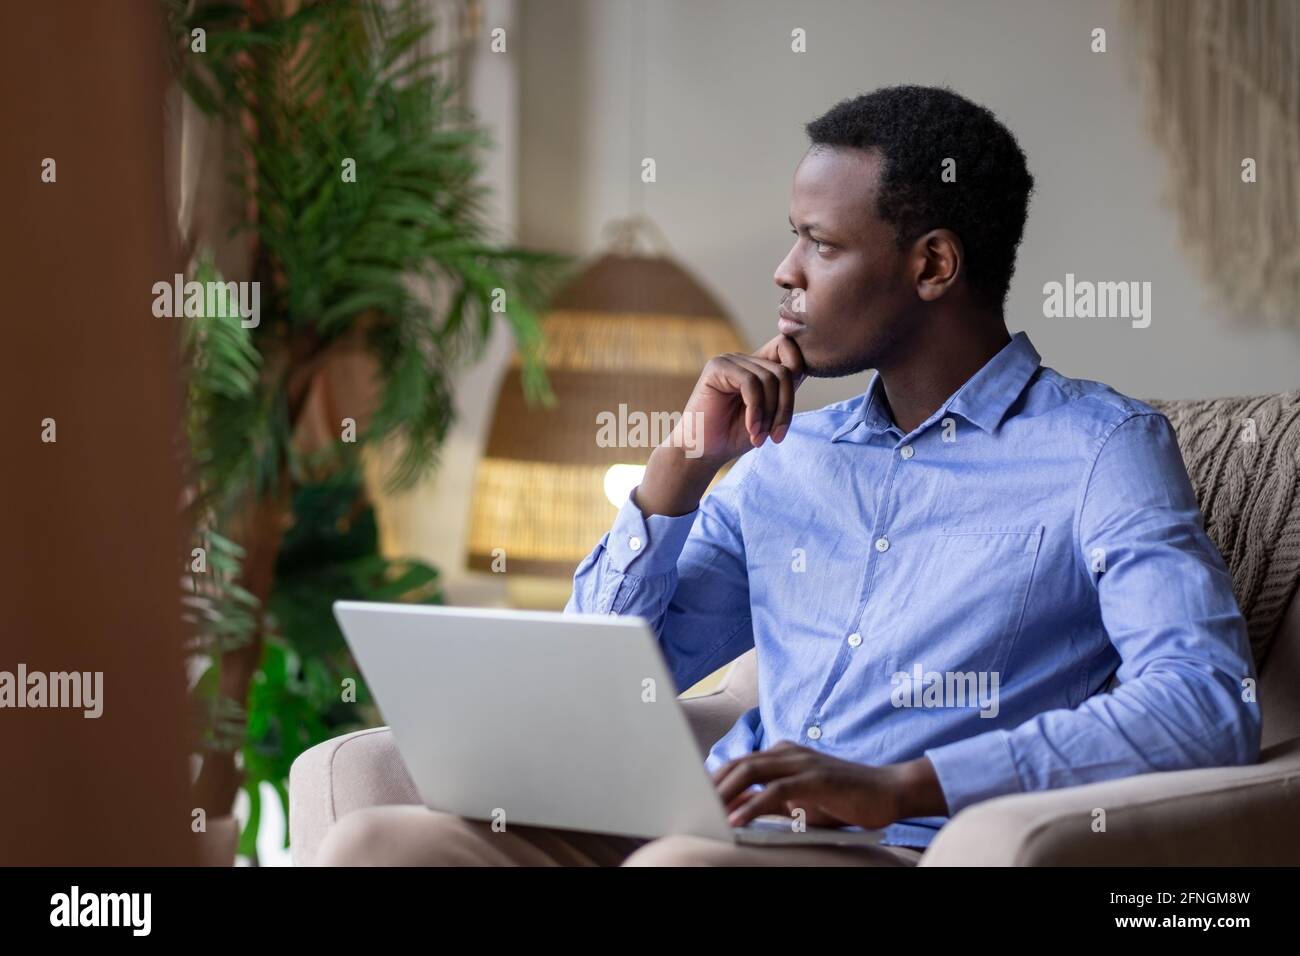 African man surfing the internet in his room at home Stock Photo